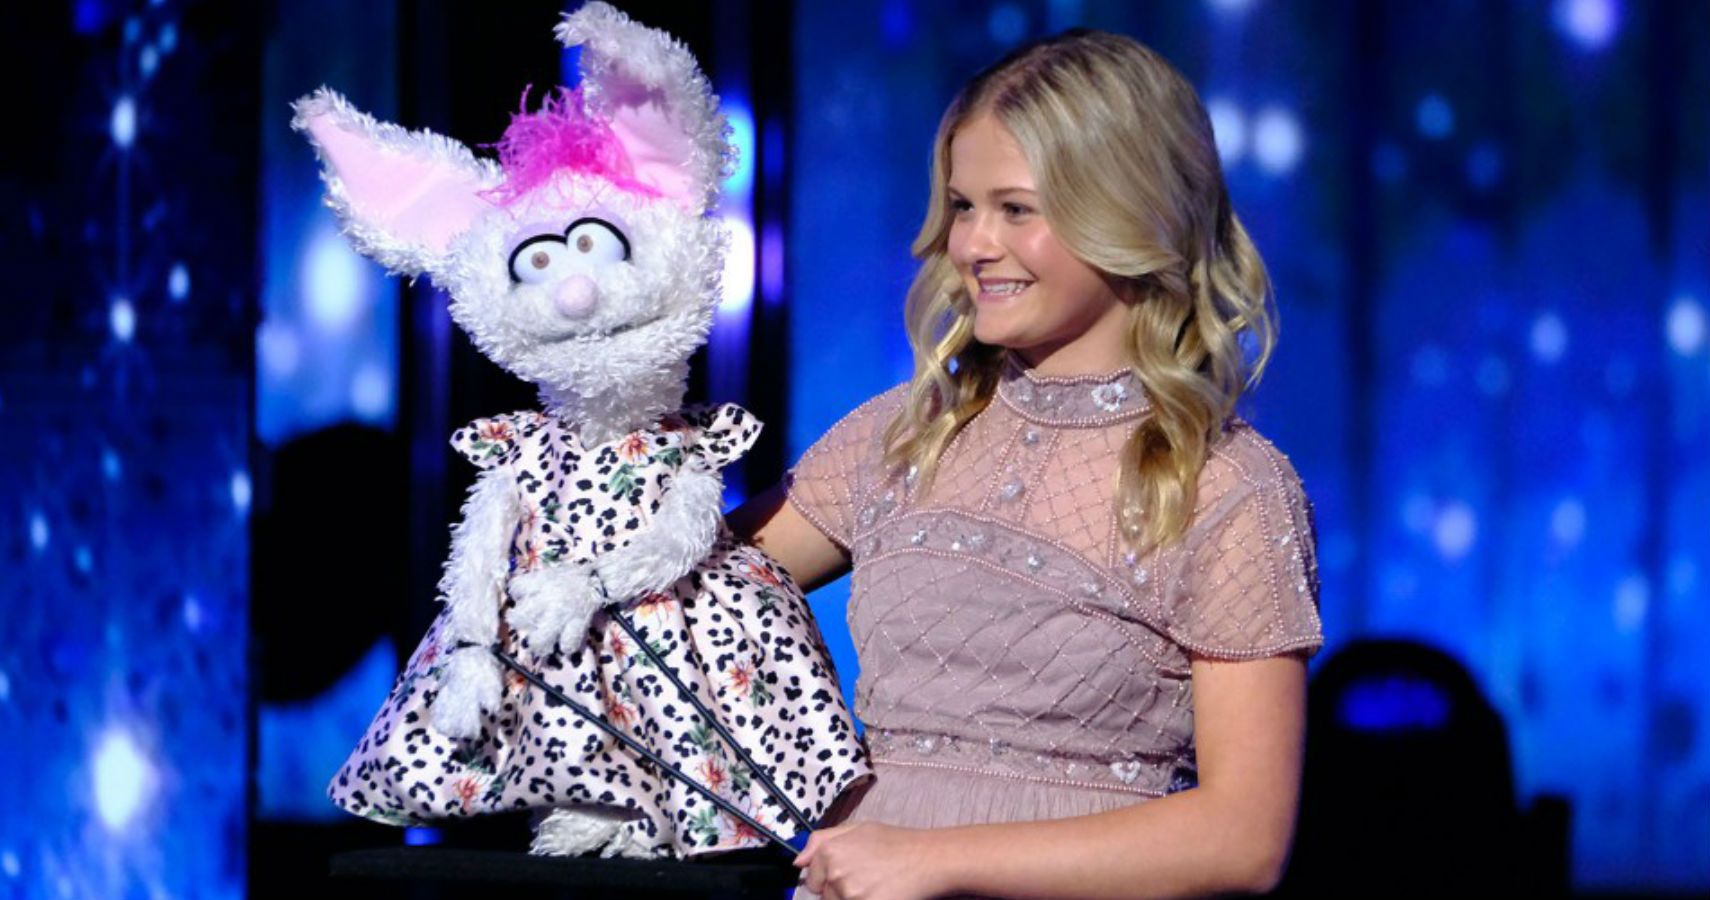 Get To Know Darci Lynne From 'AGT' Fame